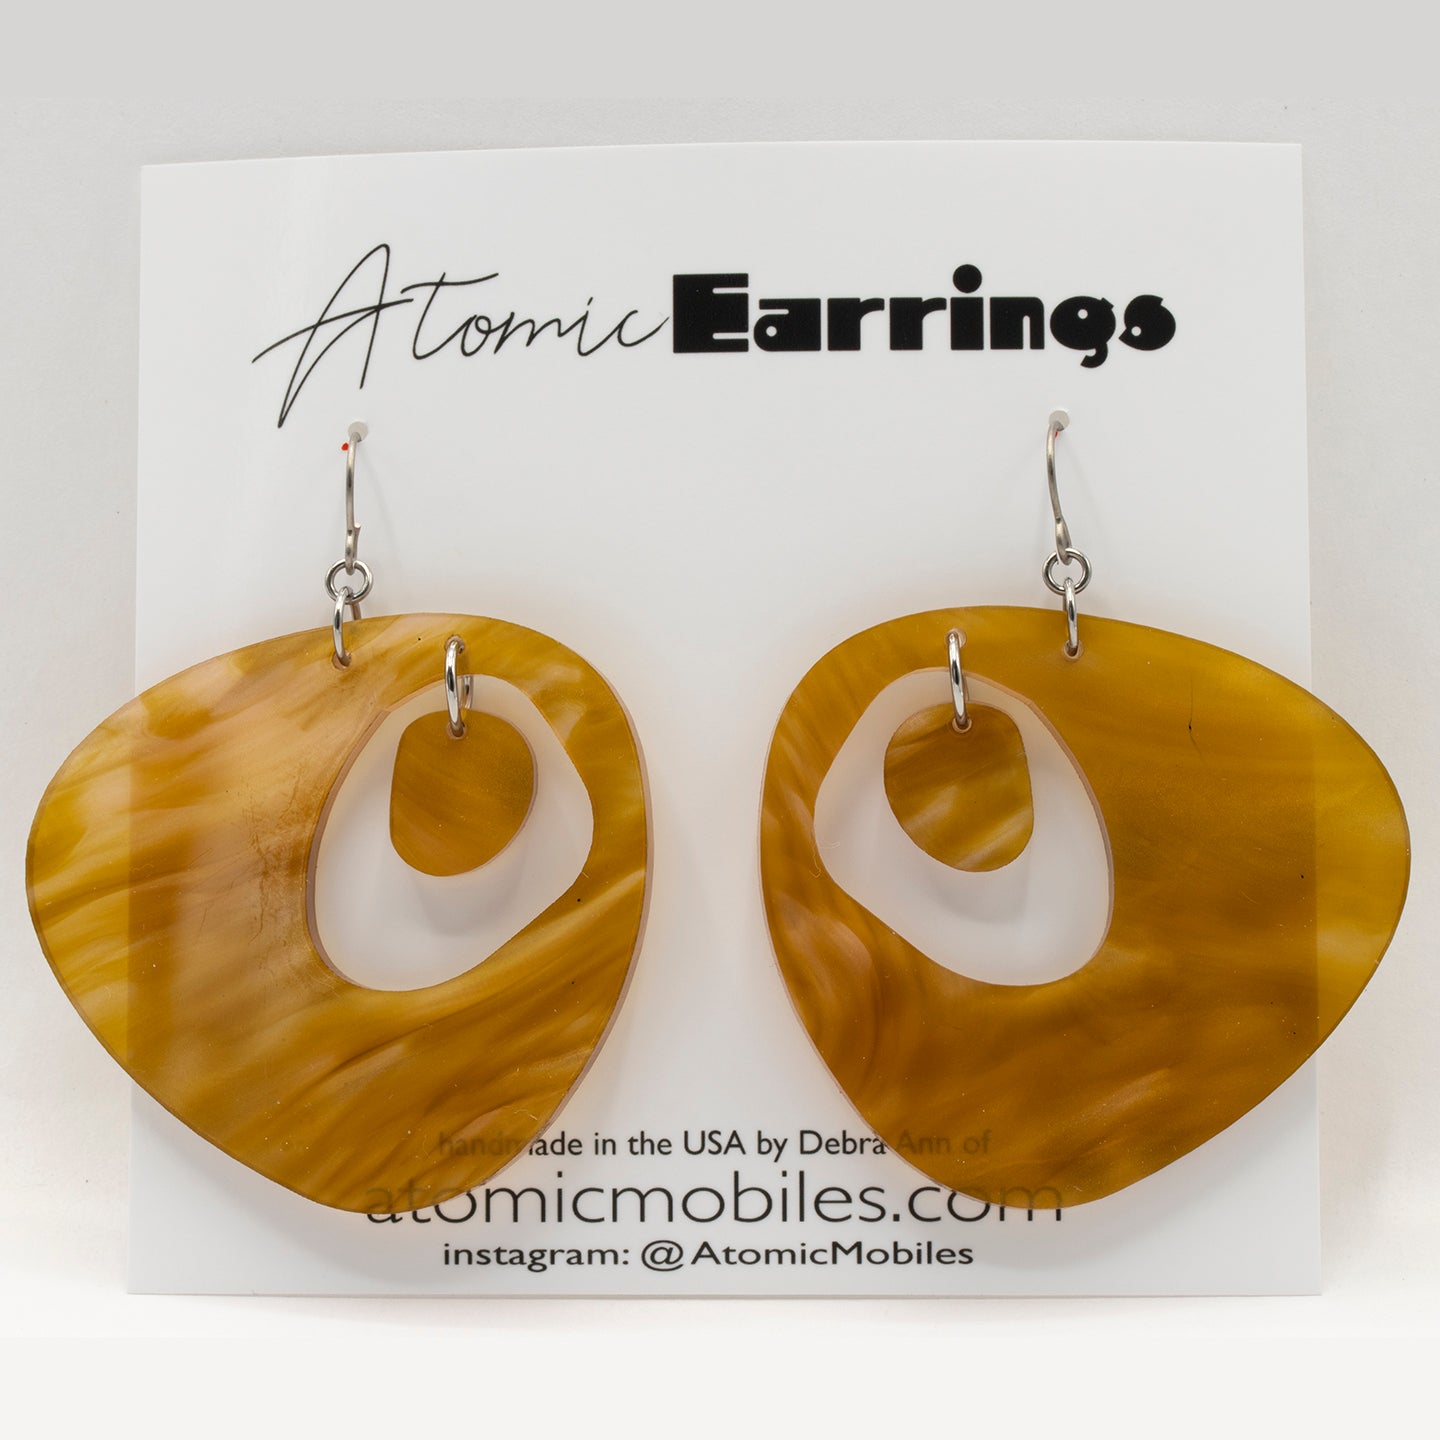 The Googie Atomic Earrings in marble gold - midcentury retro space age inspired - by AtomicMobiles.com